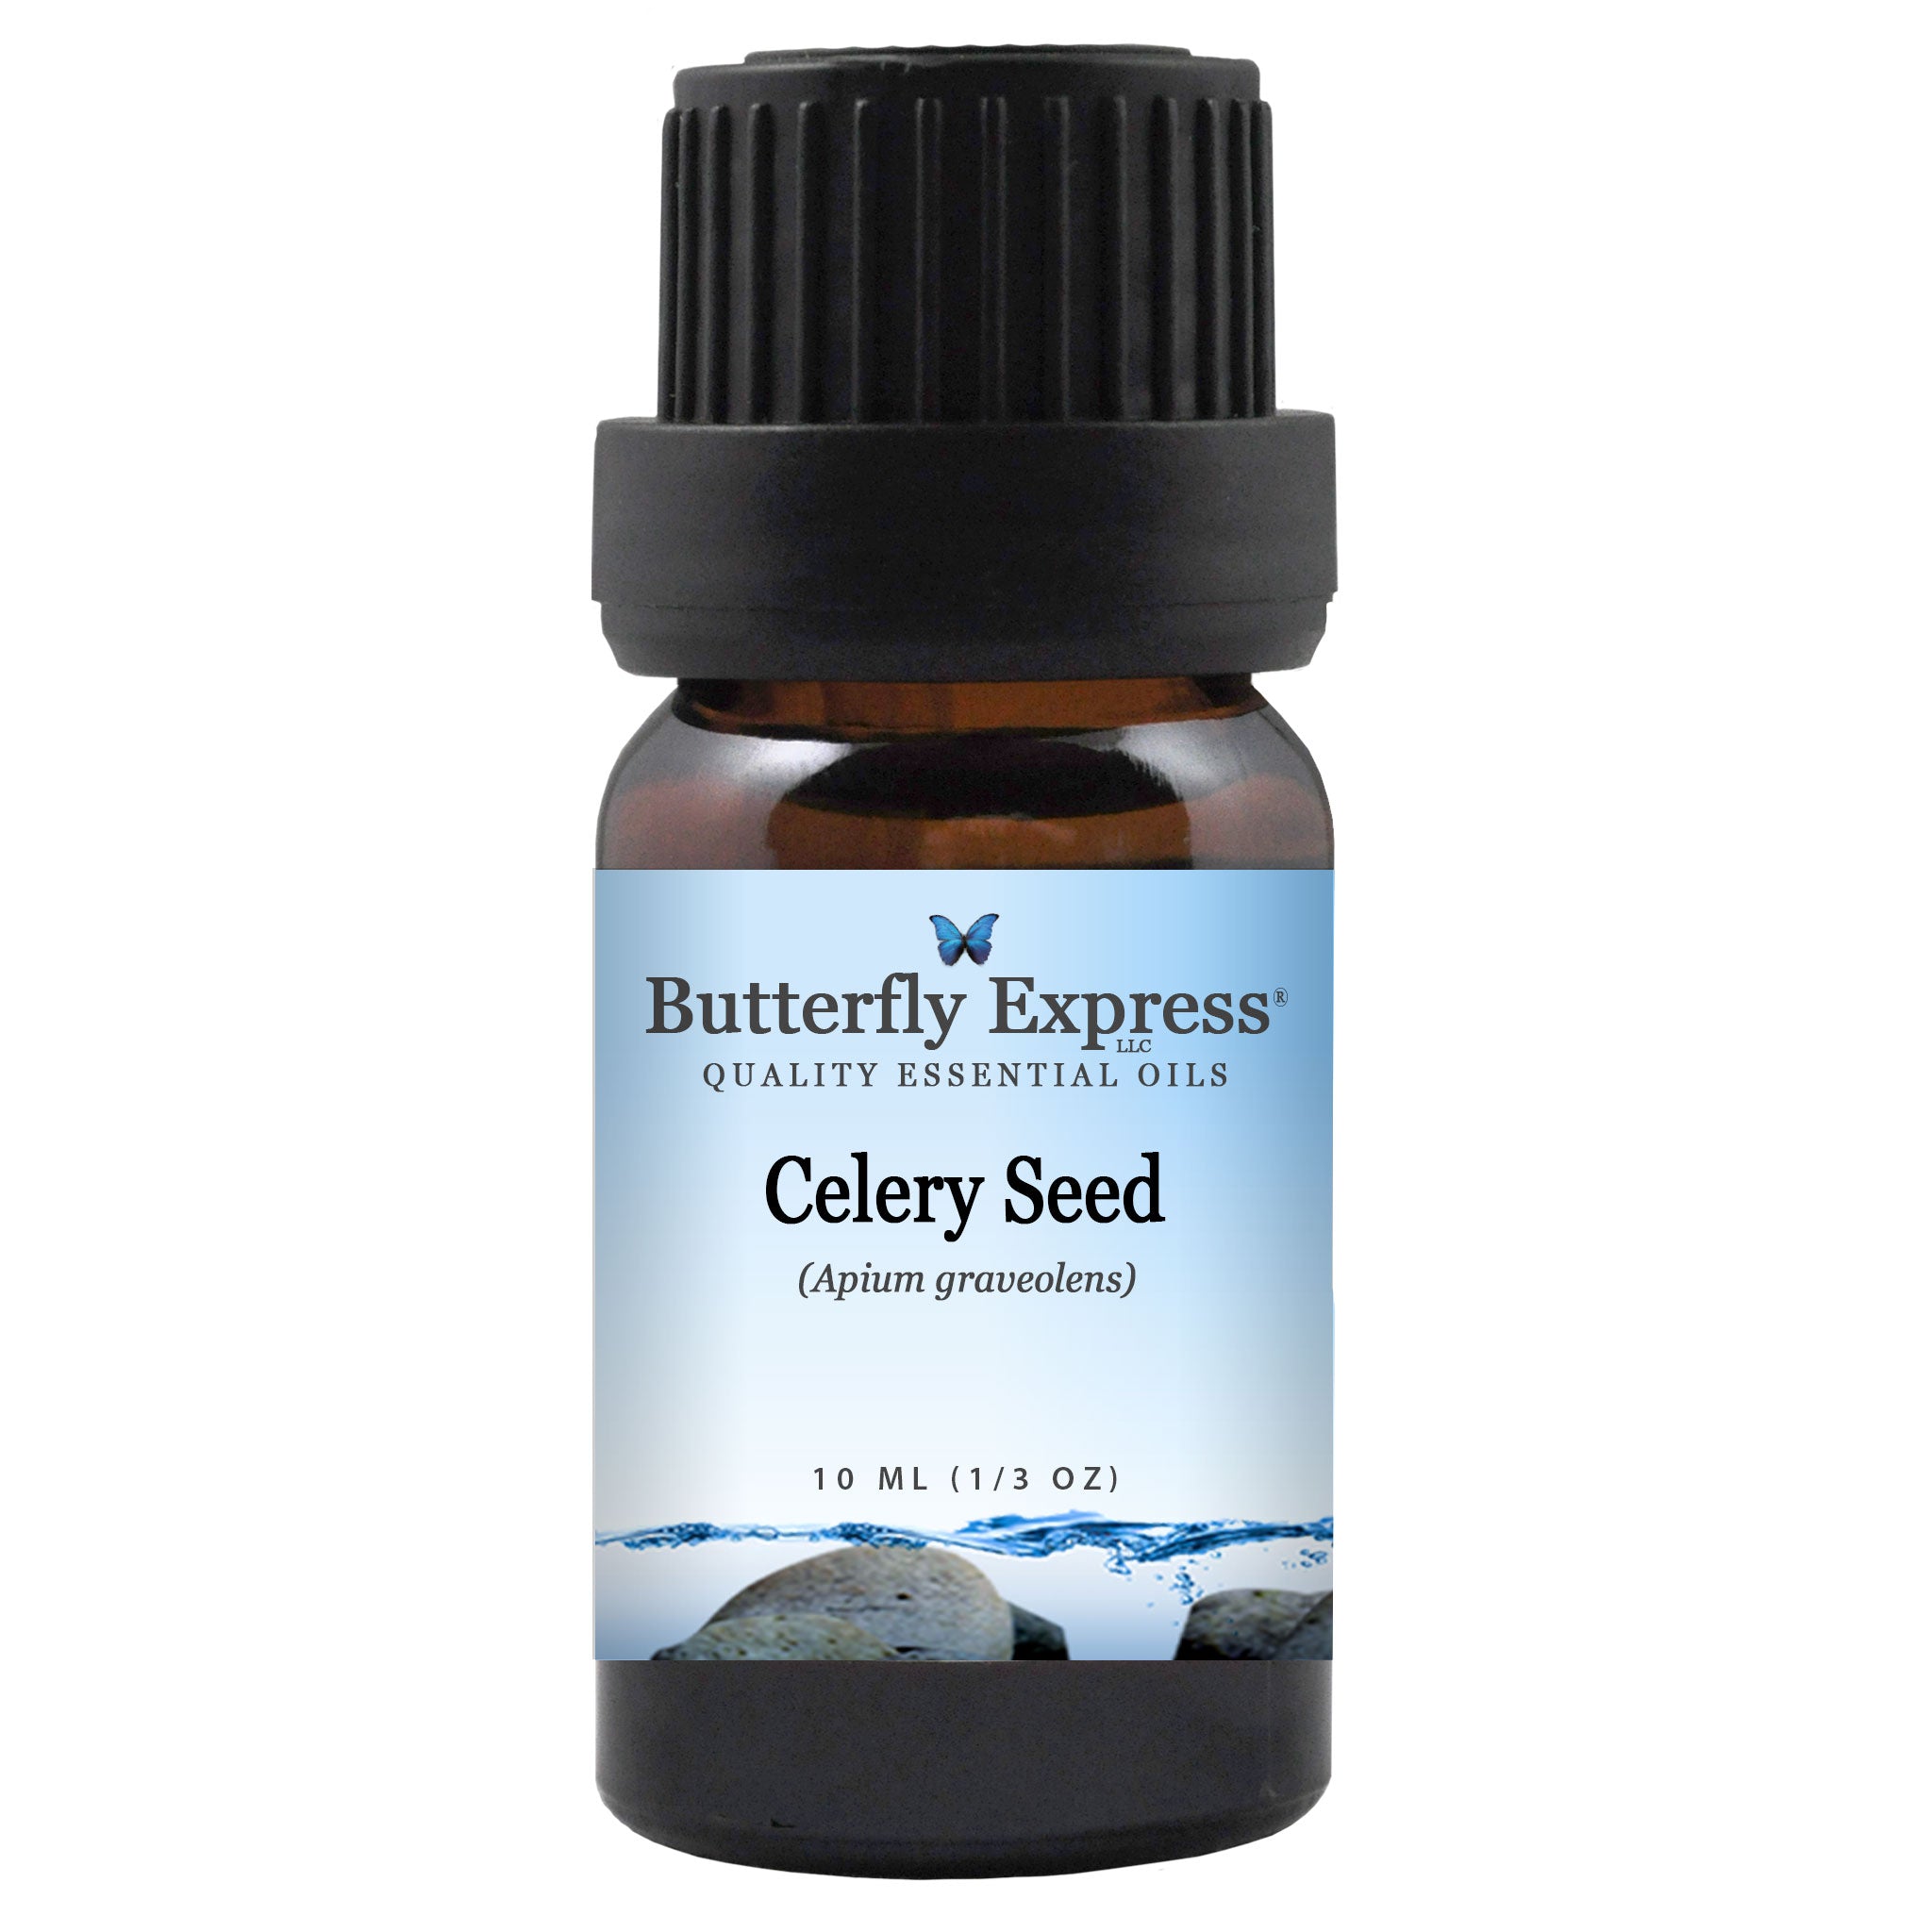 Celery Seed Essential Oil – Plant Therapy